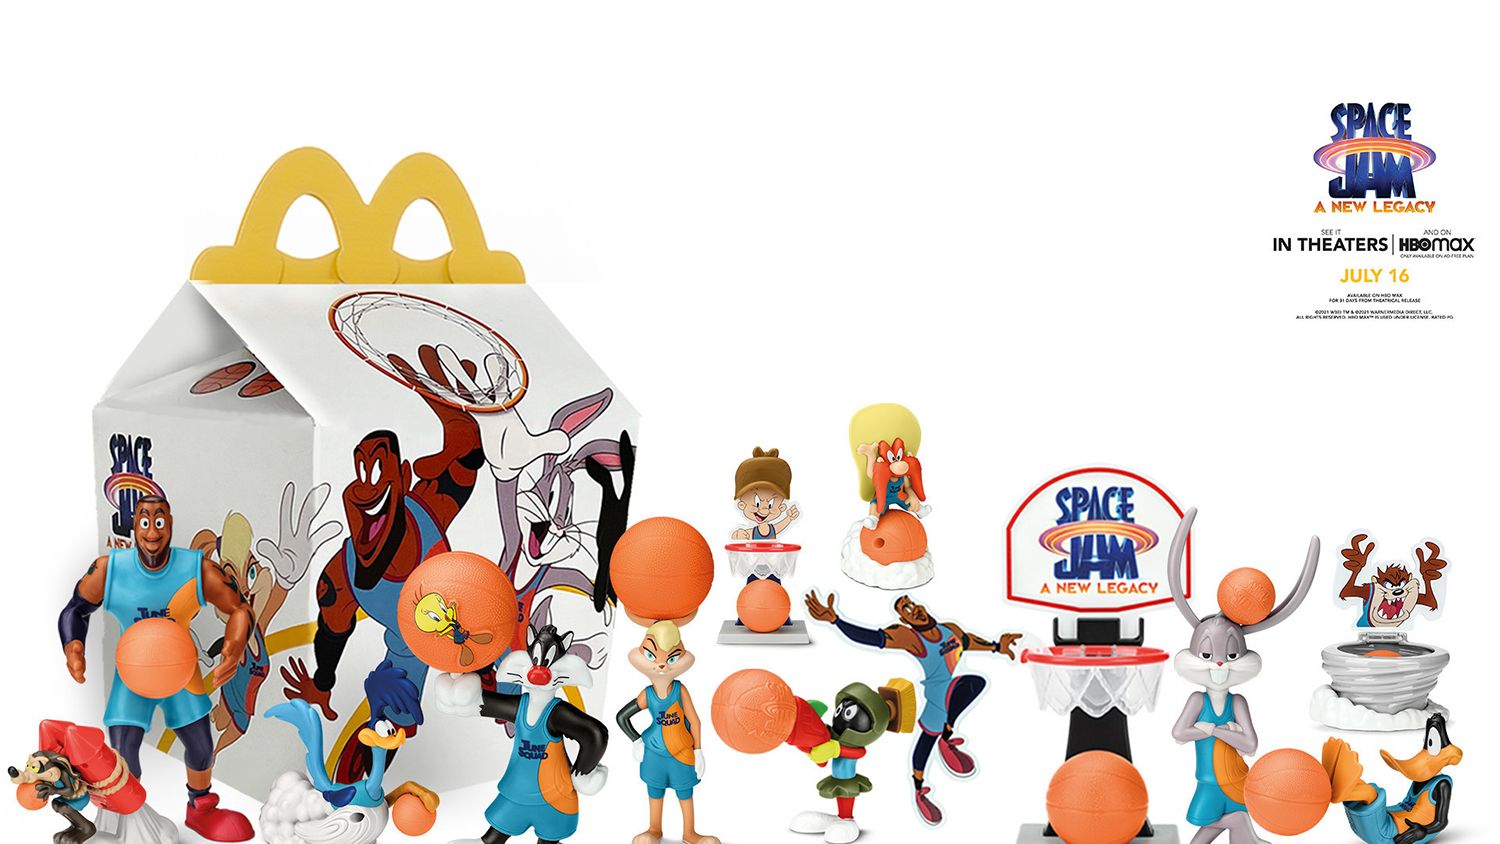 McDonald's Has New 'Space Jam' Toys In Happy Meals Ahead Of The Movie